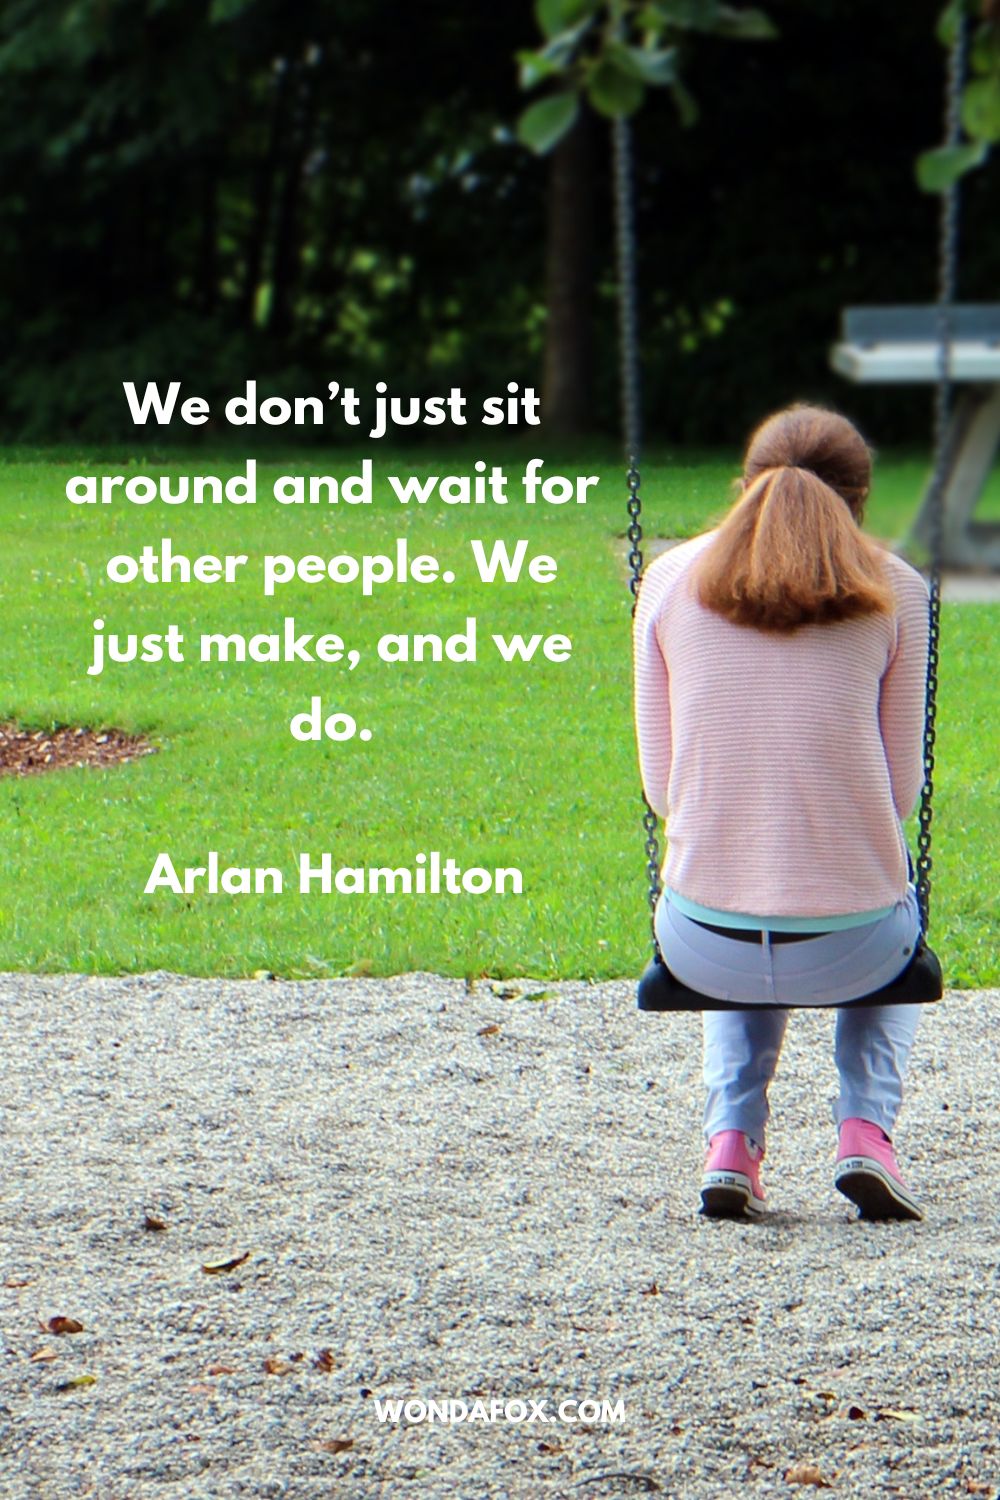 We don’t just sit around and wait for other people. We just make, and we do. Arlan Hamilton